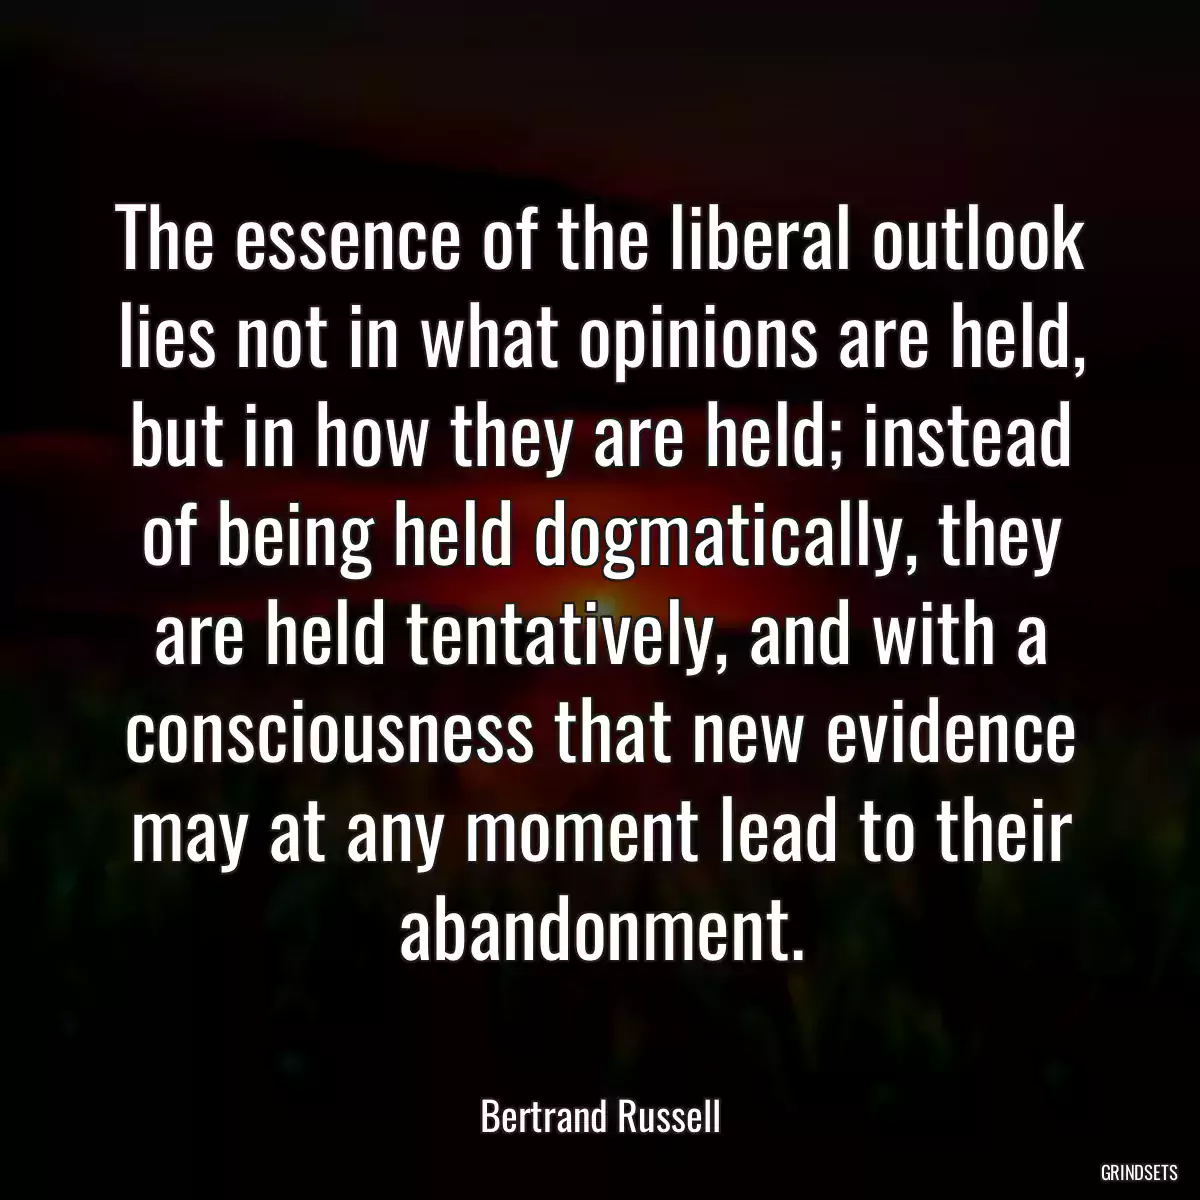 The essence of the liberal outlook lies not in what opinions are held, but in how they are held; instead of being held dogmatically, they are held tentatively, and with a consciousness that new evidence may at any moment lead to their abandonment.